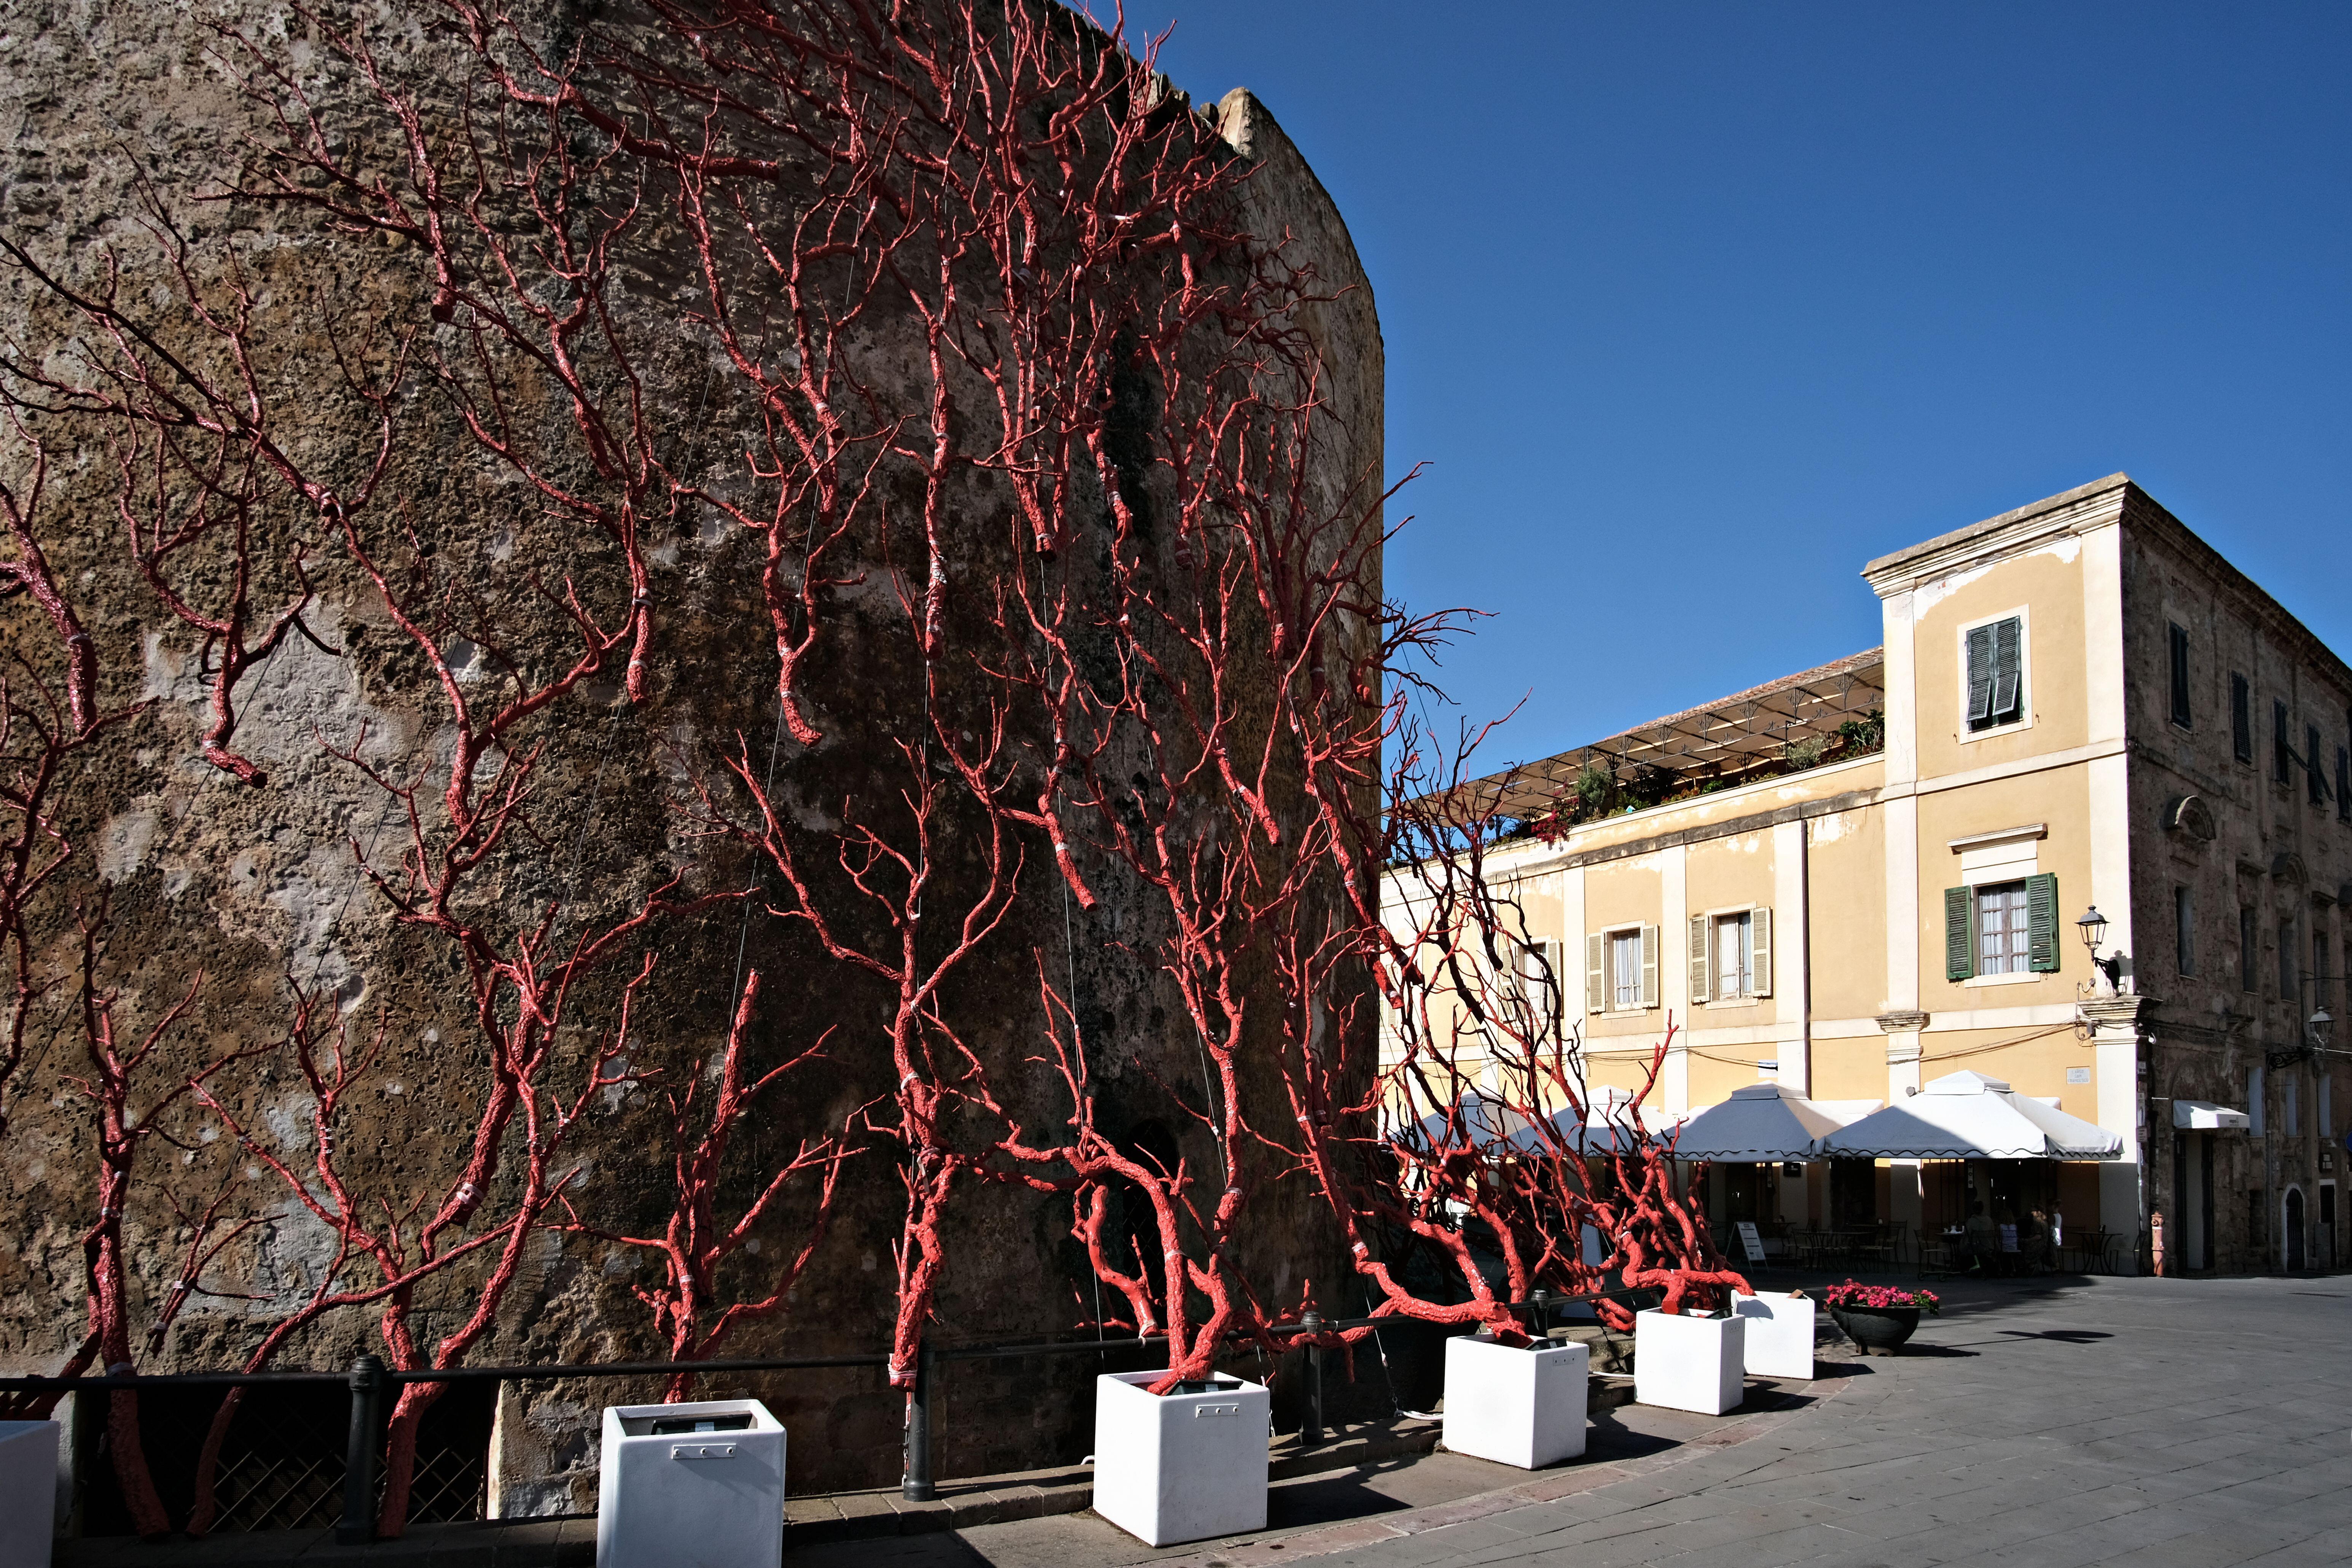 Tower in Alghero decorated with red coral (Alamy/PA)